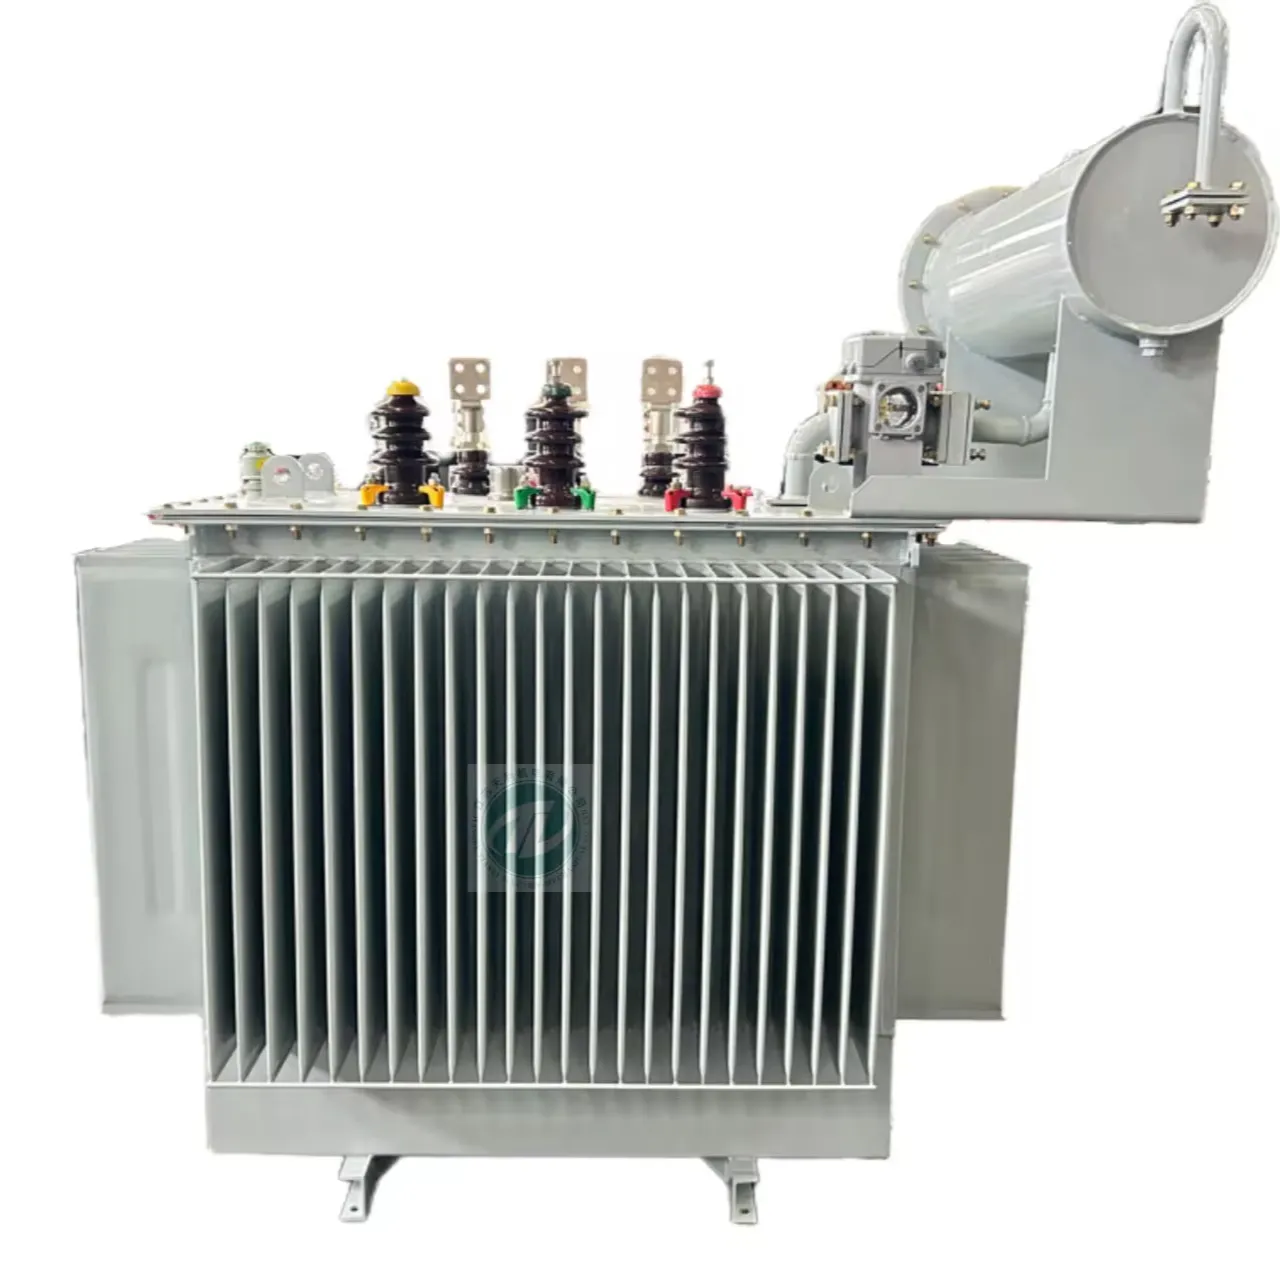 power transformer electrical equipment inverter electrical transformer 1250KVA Energy saving mv&hv transformers for factory